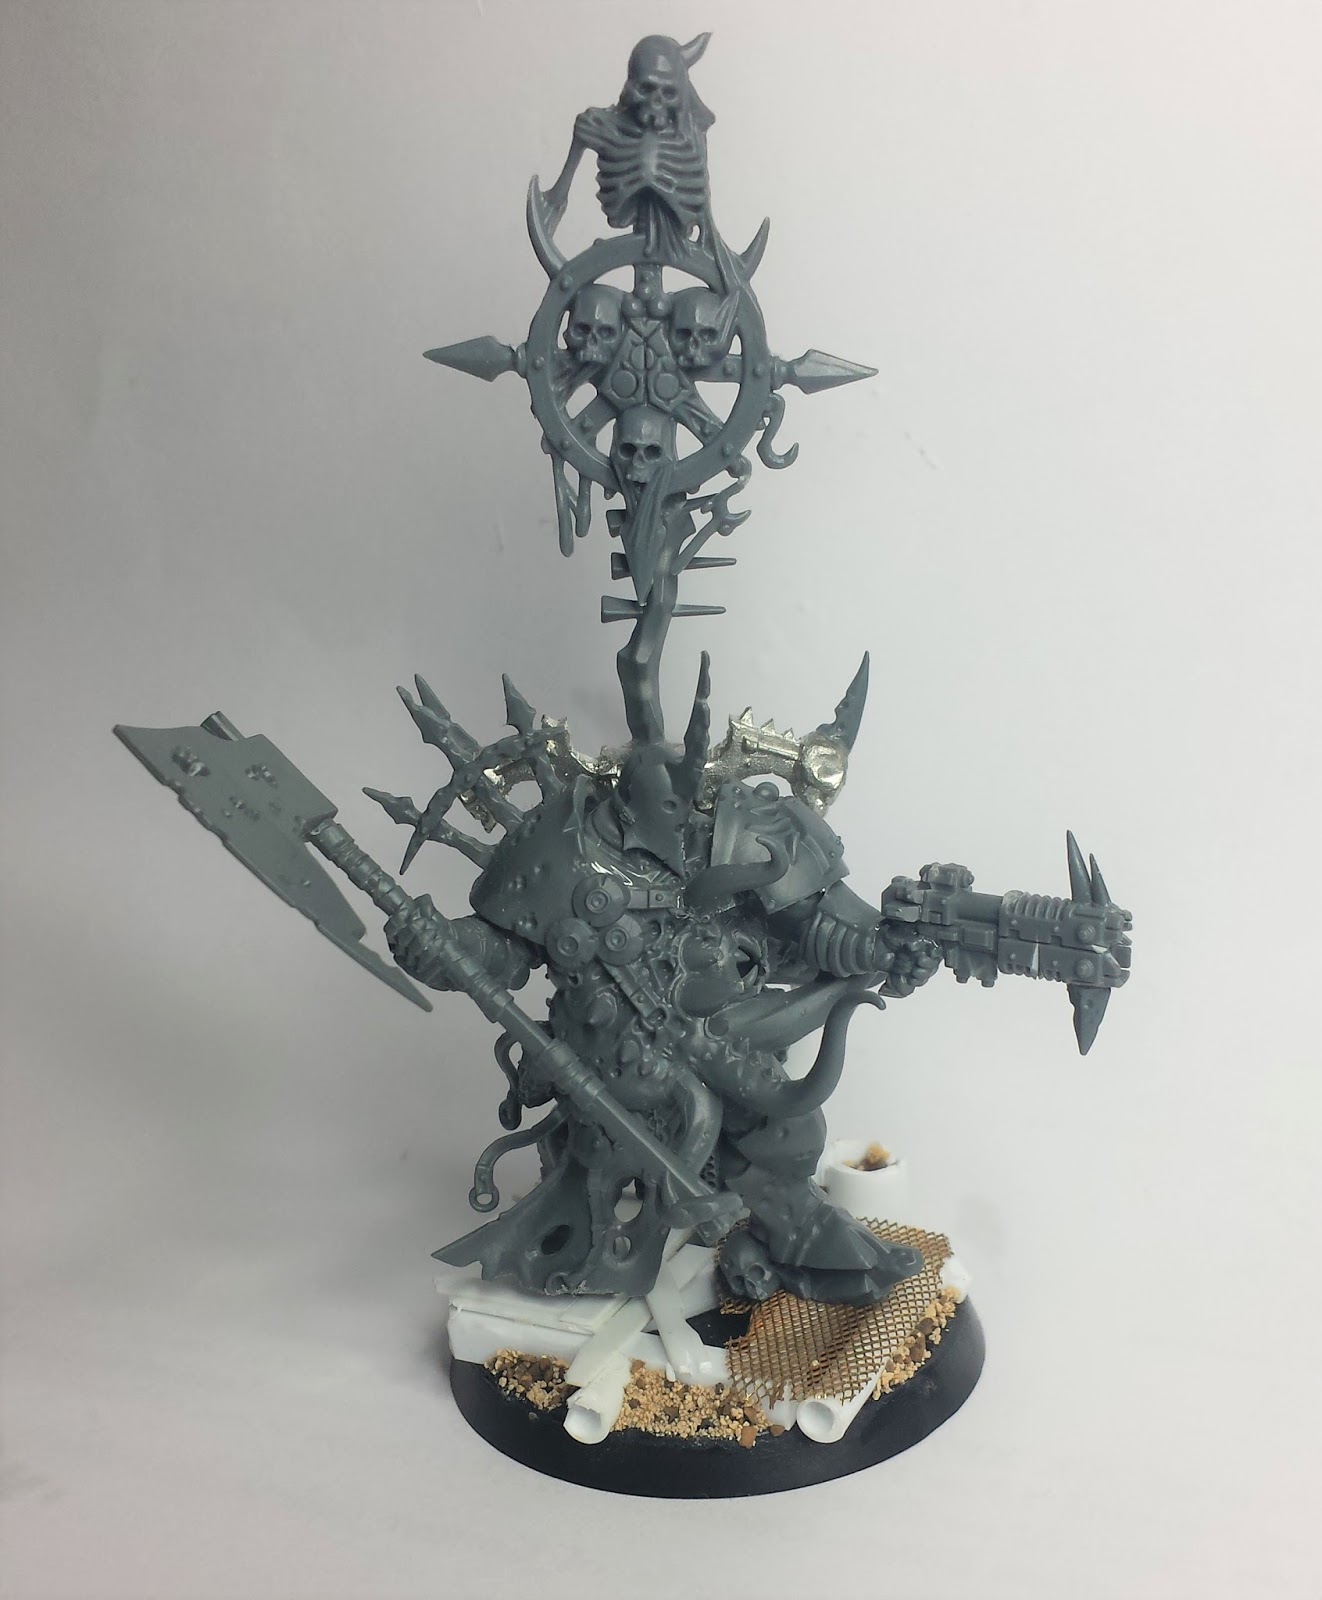 Mockingbird Tremble overførsel Your Death Guard conversions - x DEATH GUARD x - The Bolter and Chainsword